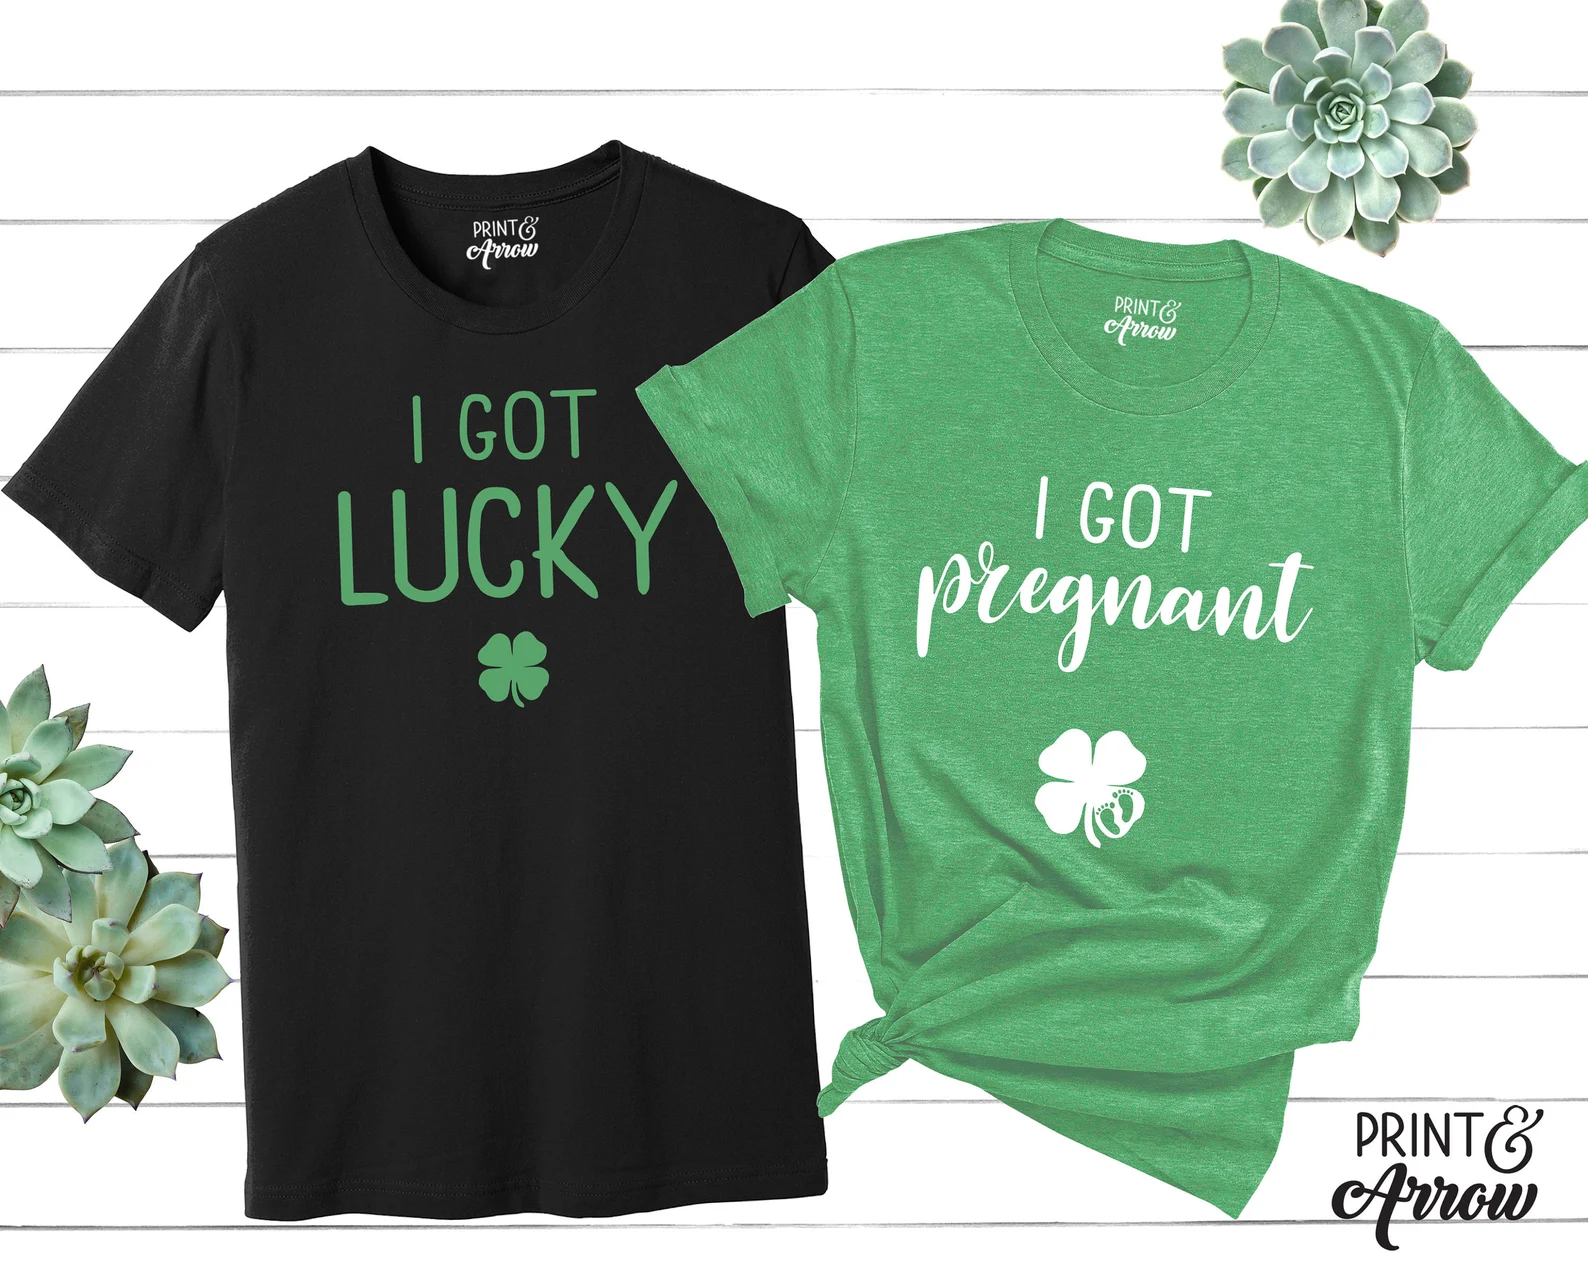 Green and black pregnancy announcement t-shirts 